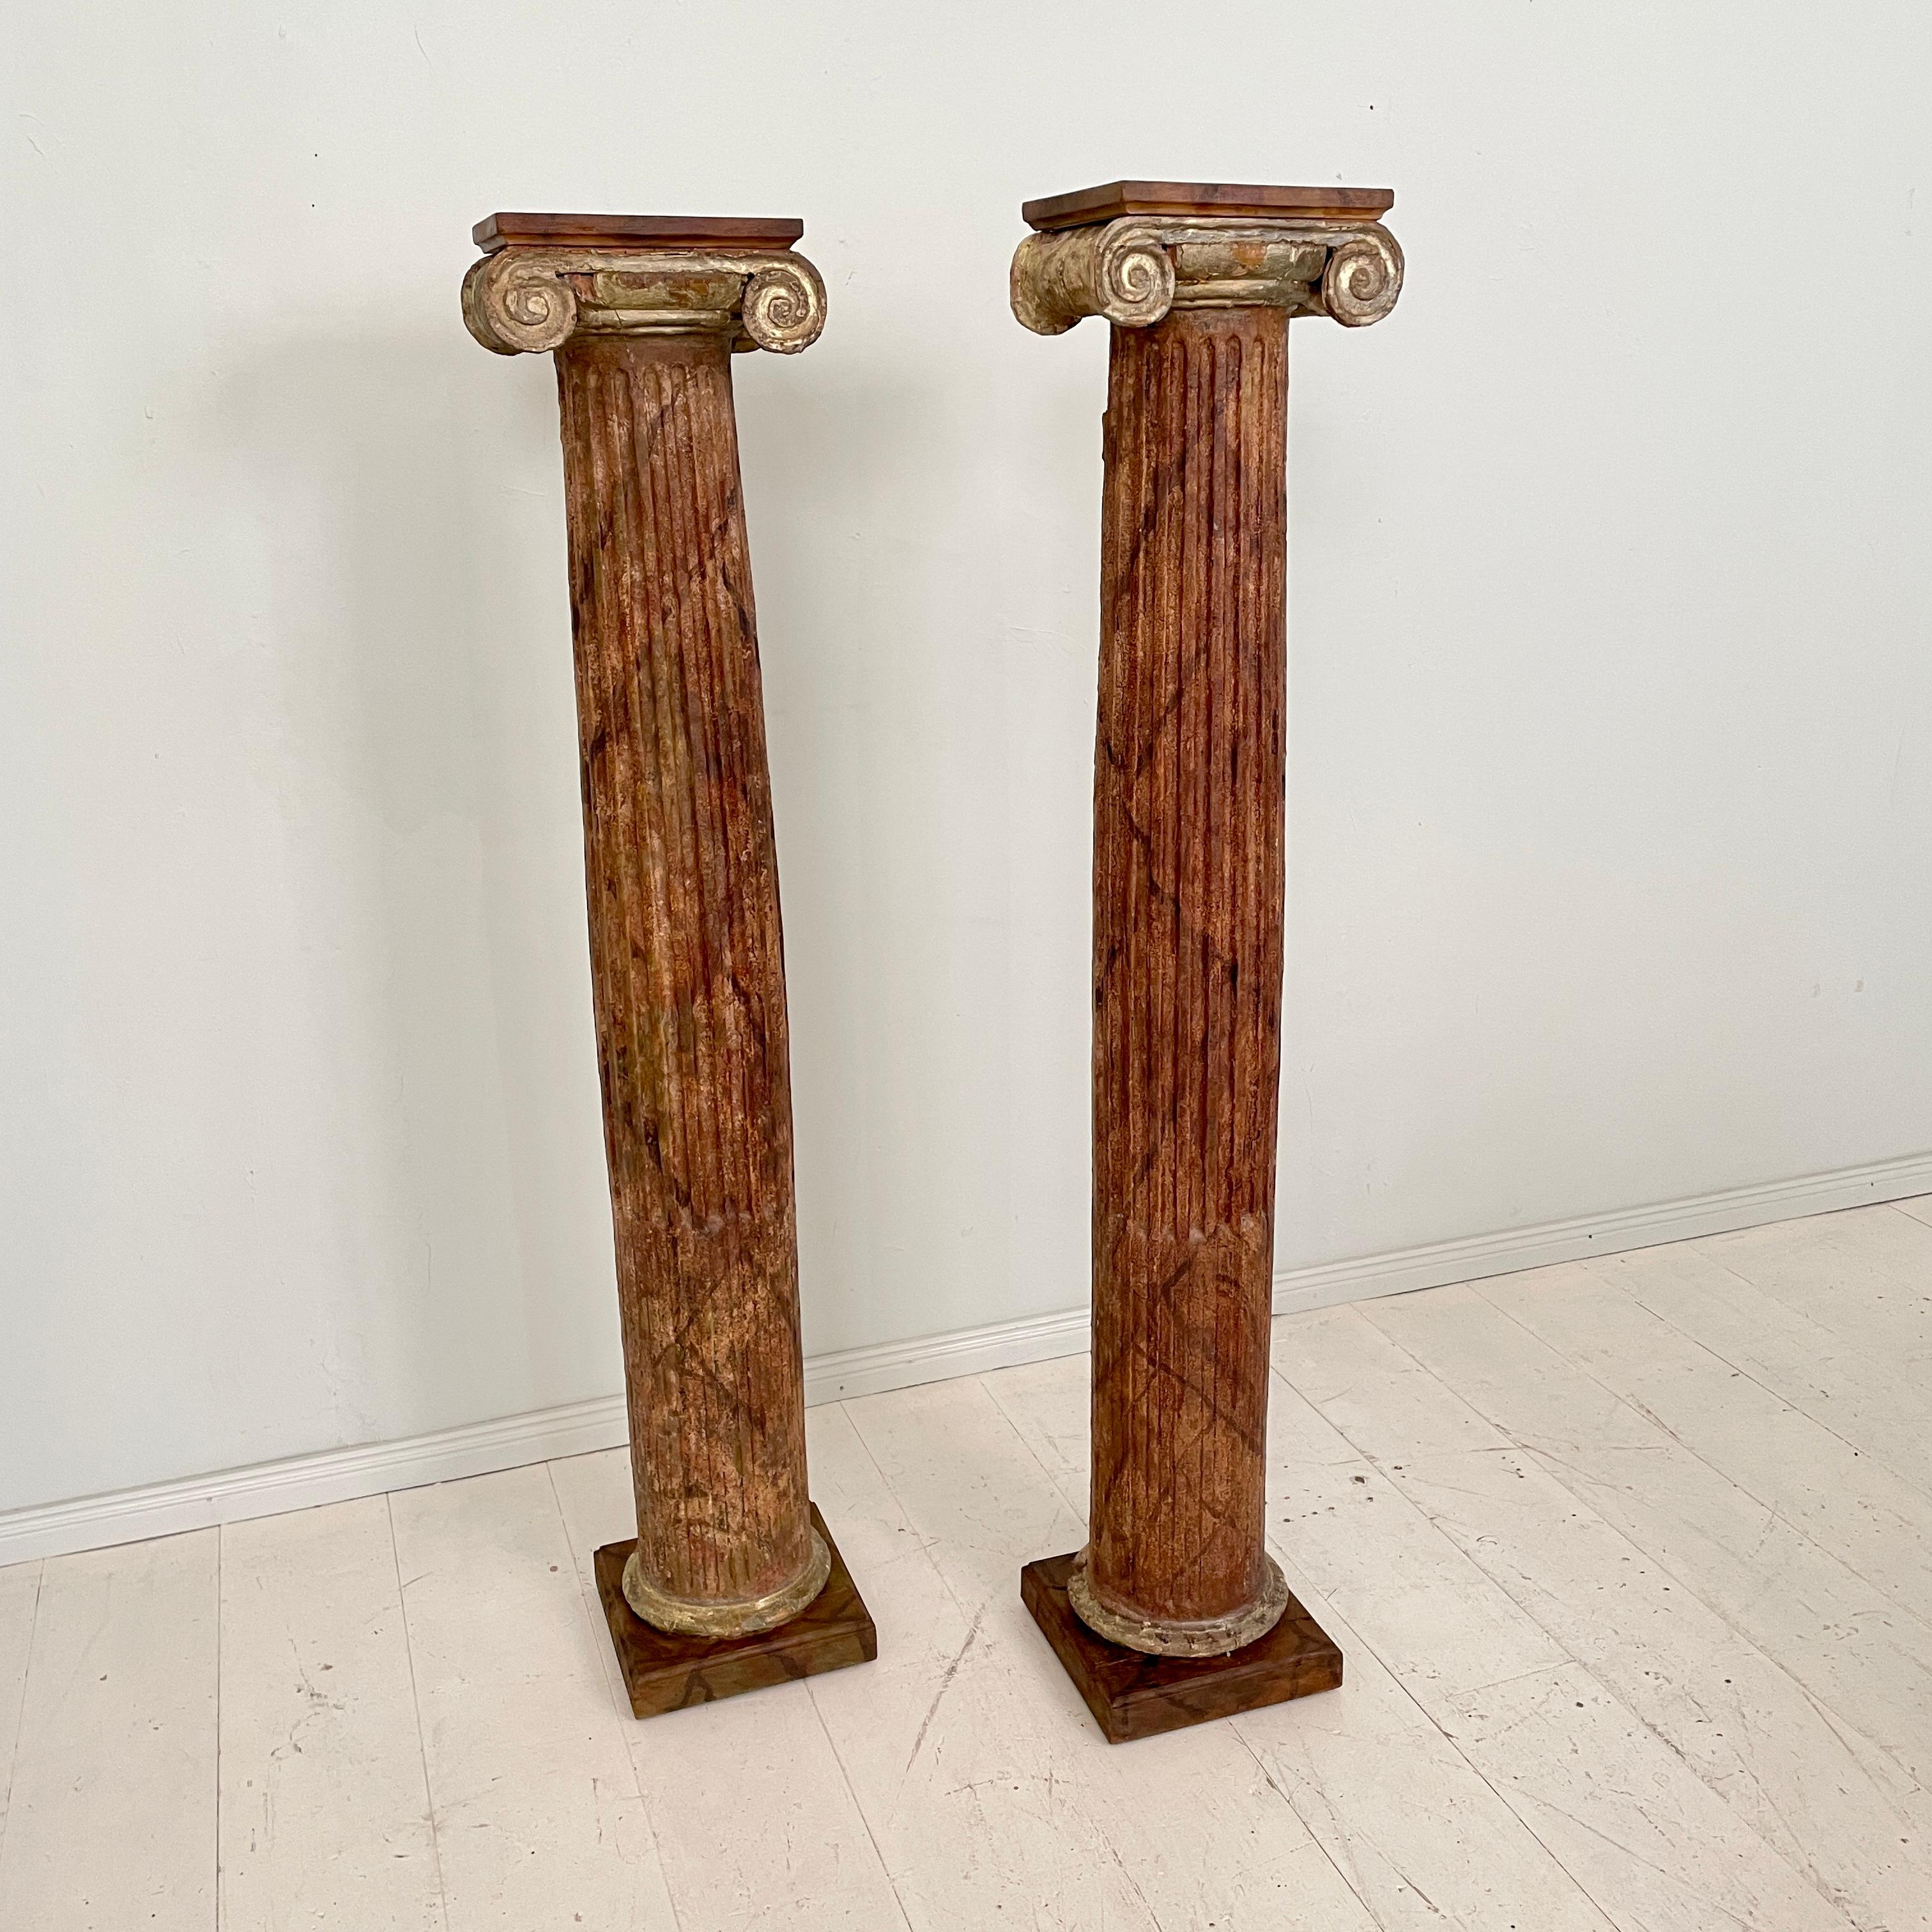 Early 19th Century Pair of Wood Columns Lacquered in Faux Marble, Around 1800 In Good Condition For Sale In Berlin, DE